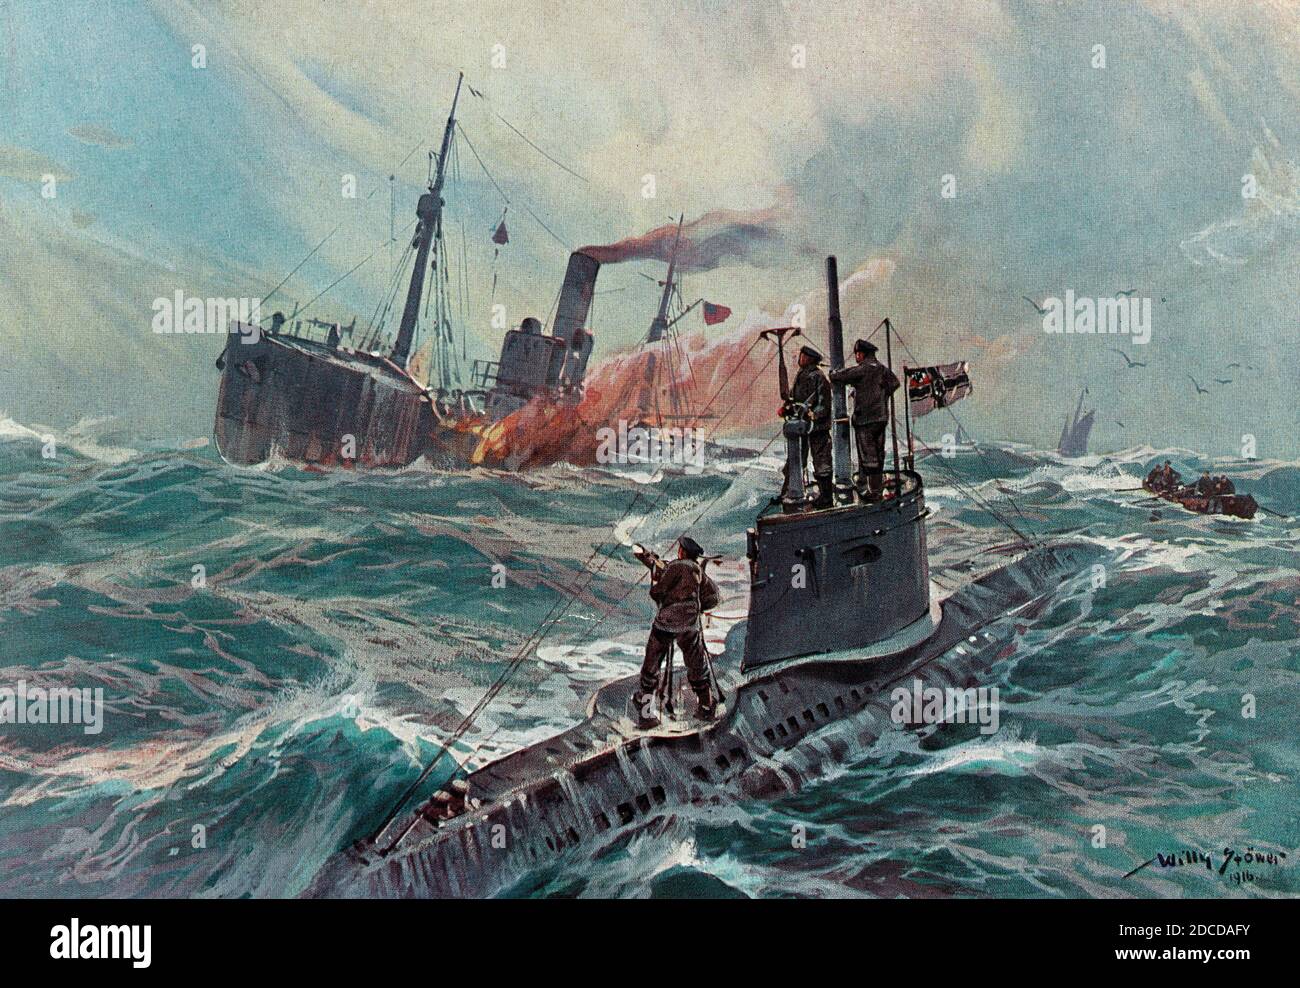 WWI, U-Boat allemand attaquant le navire marchand anglais, 1916 Banque D'Images